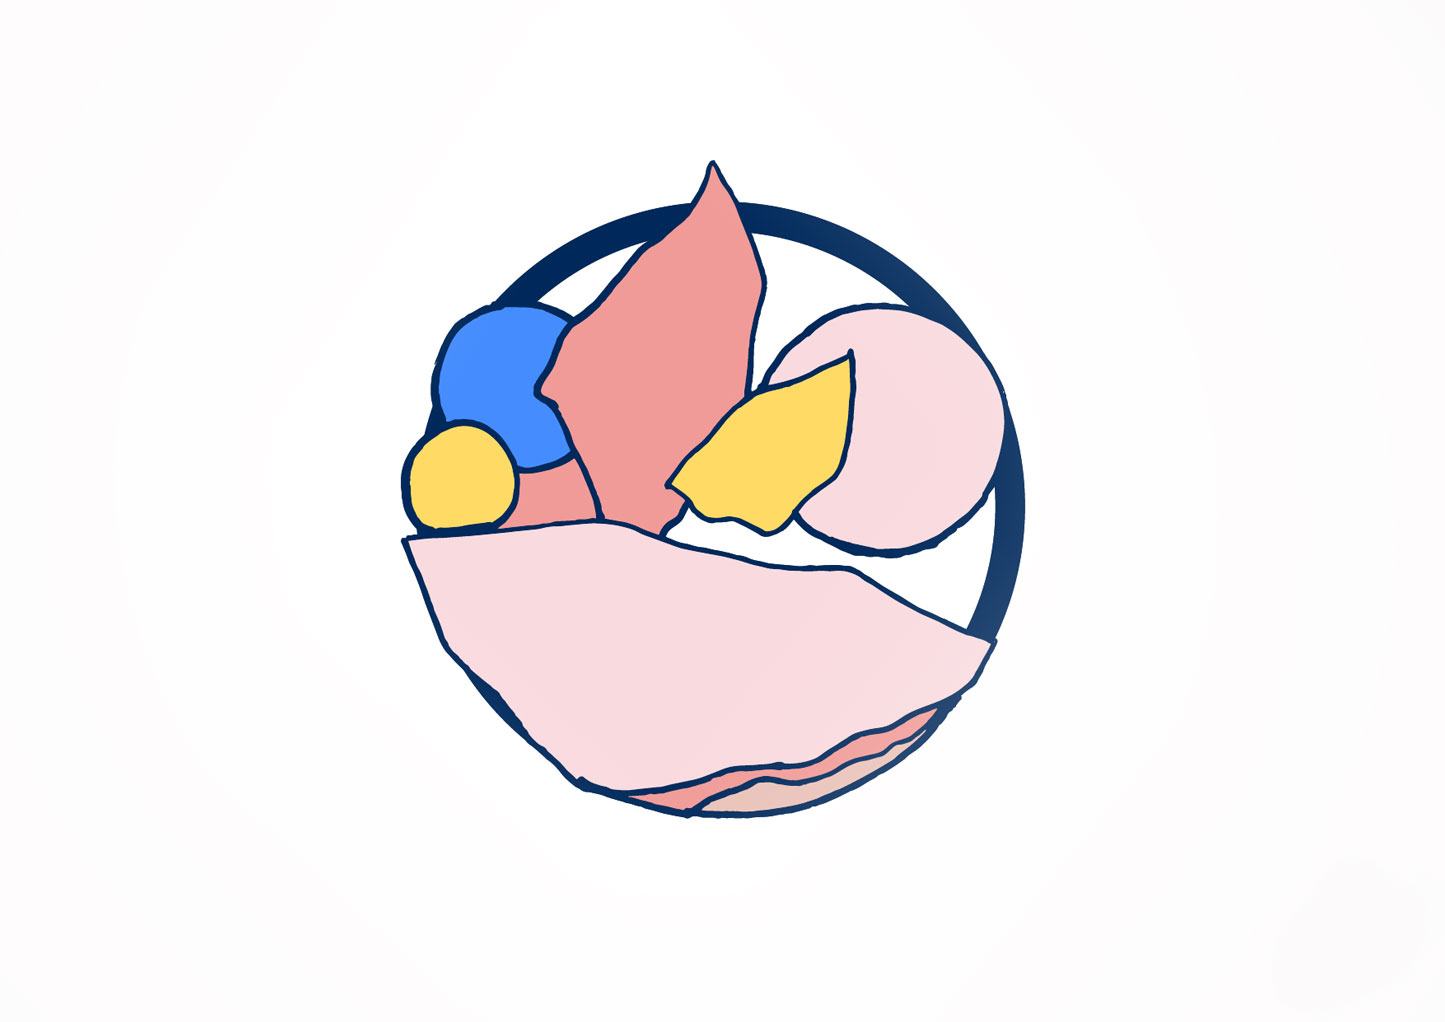 Another version of the brandmark shape but with bolder colors including navy and bright blue with the pink and yellow.